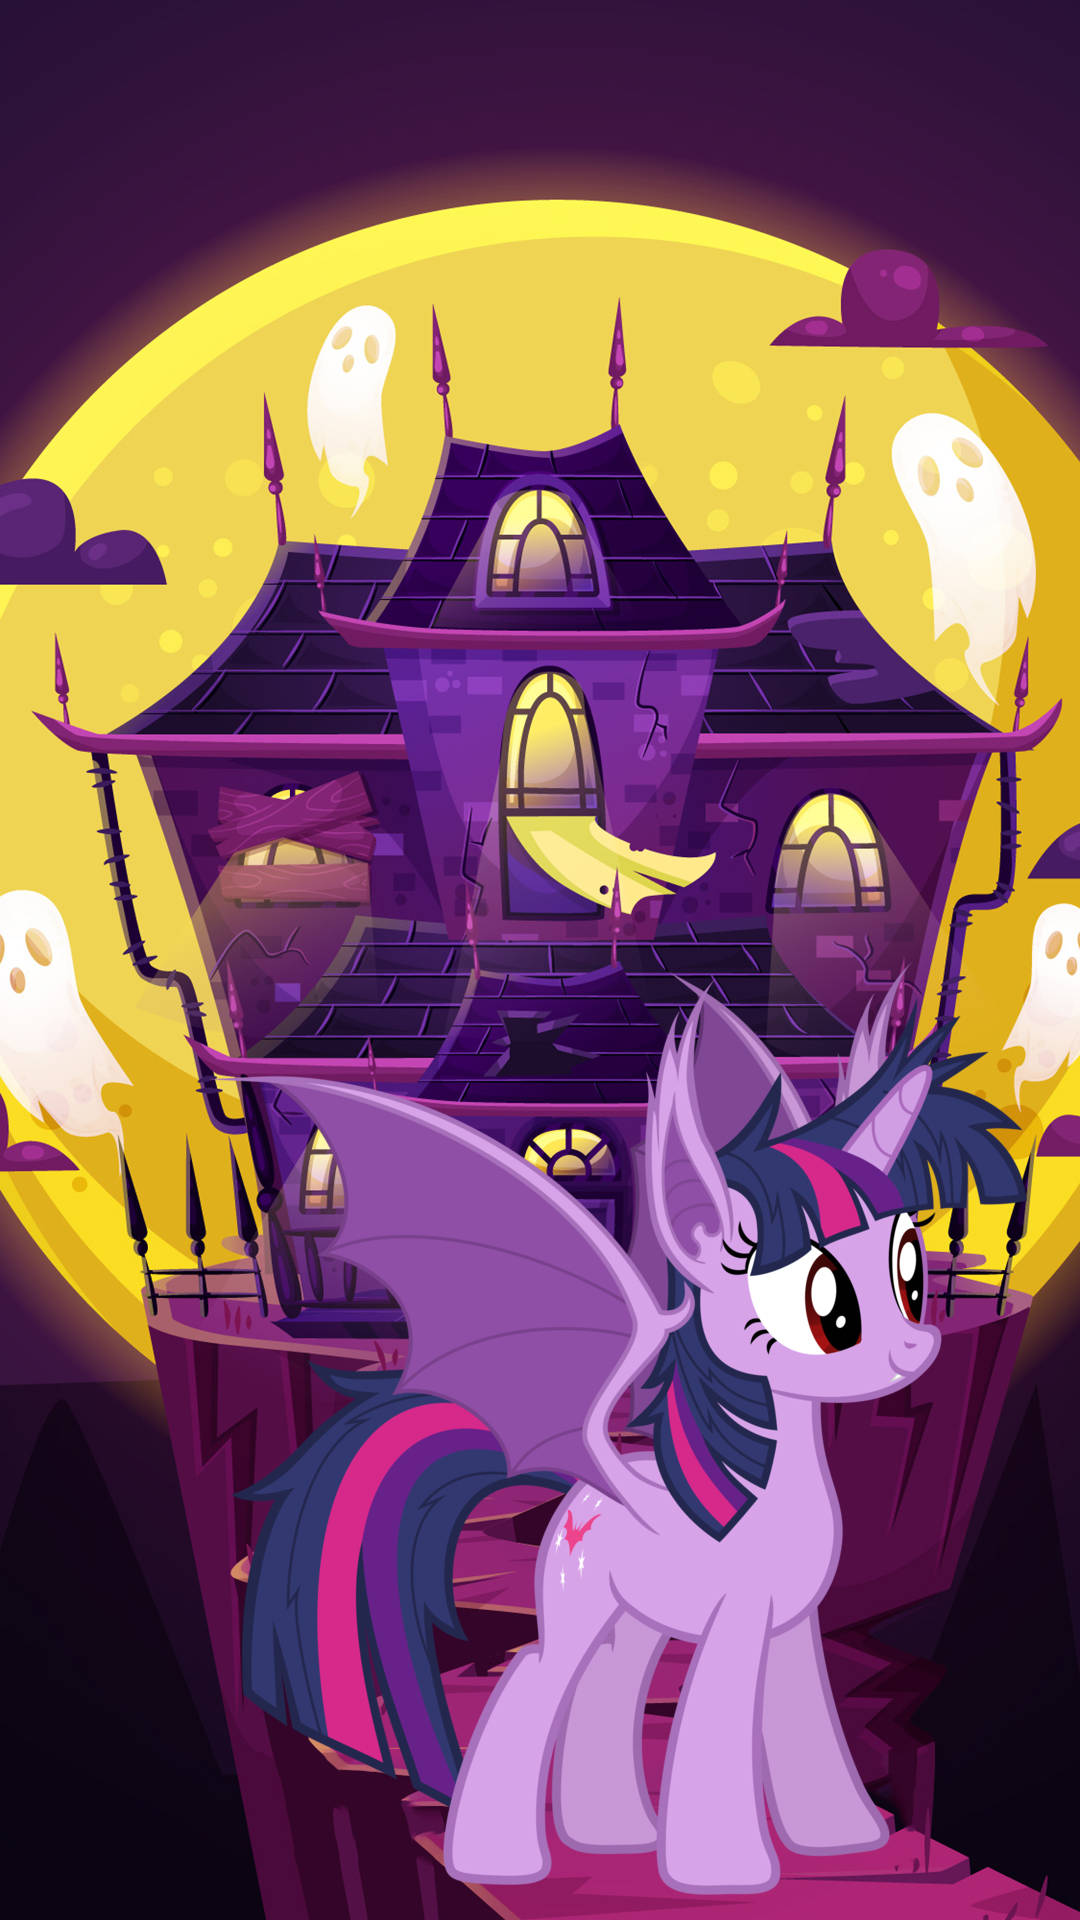 Get in the Halloween Spirit with this Cute Phone! Wallpaper